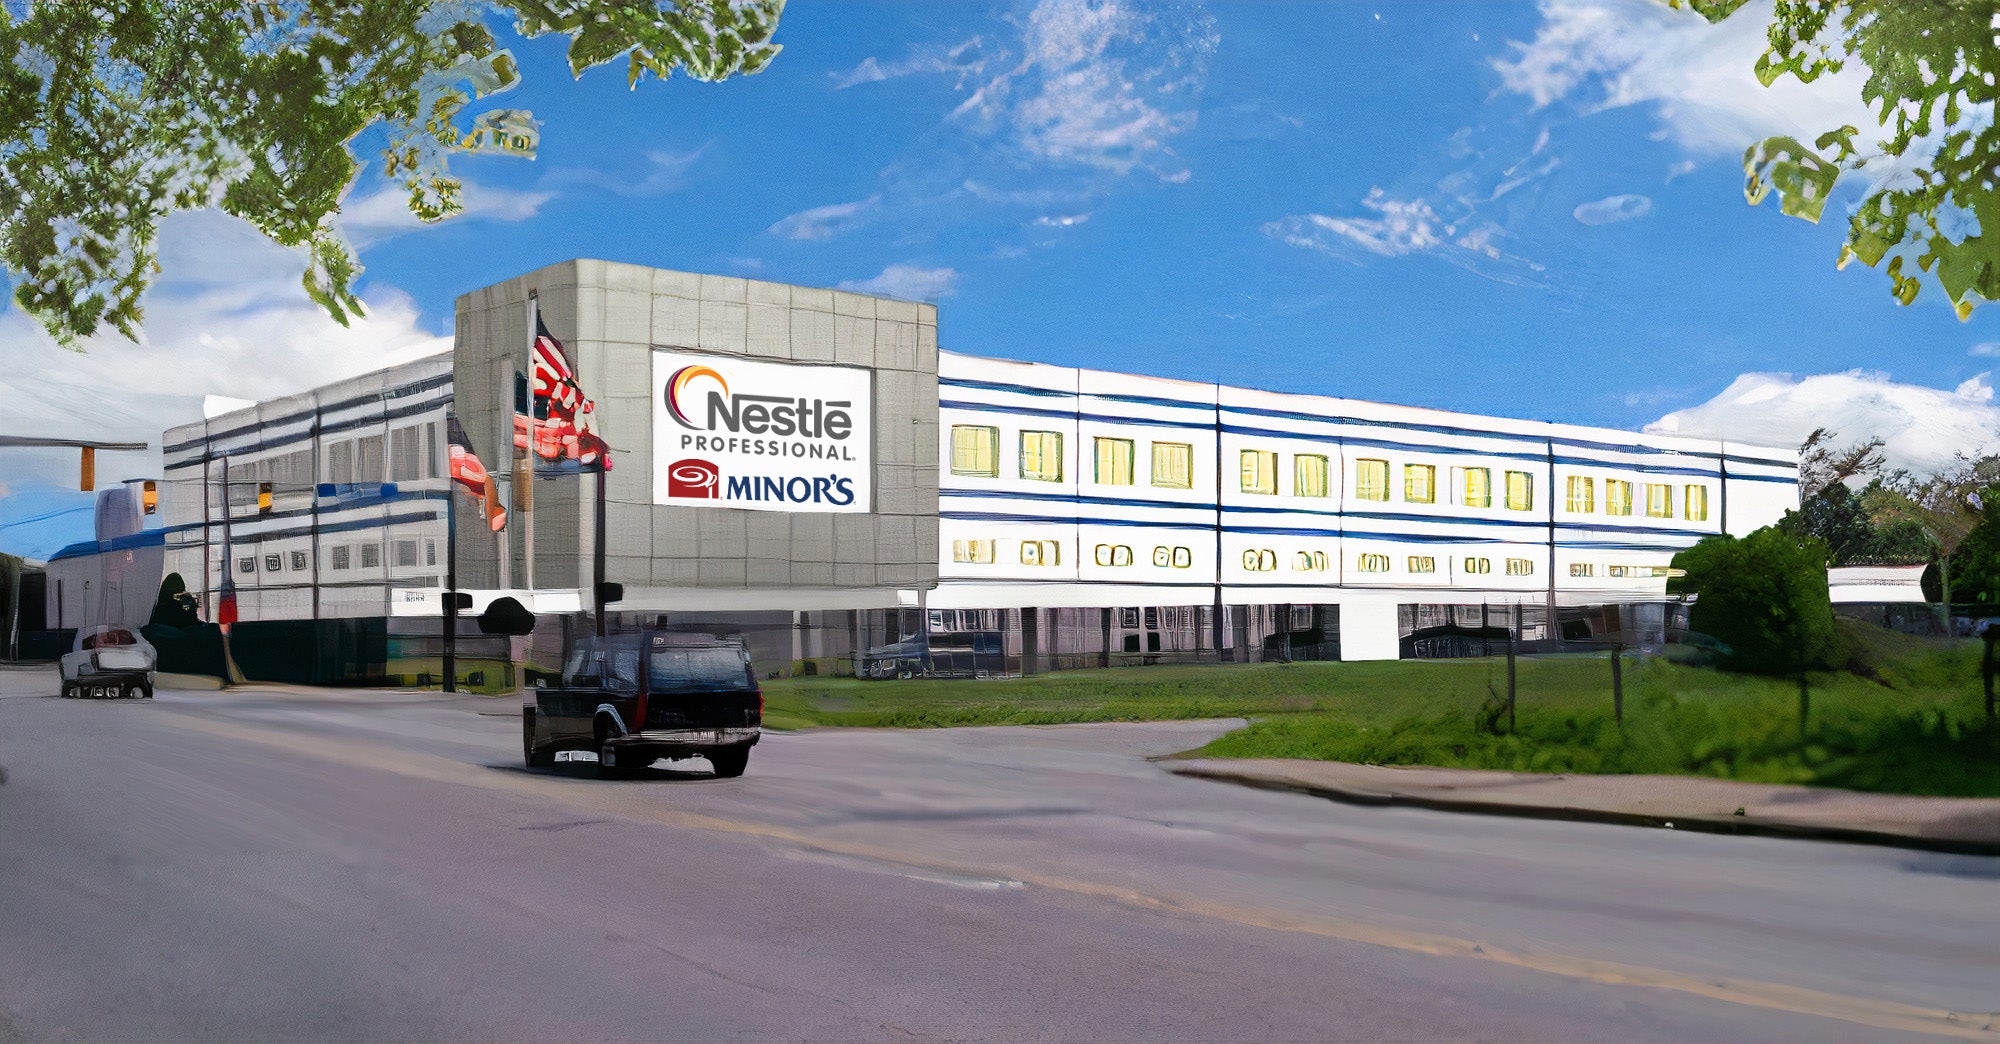 Nestlé Professional Minor’s Factory in Cleveland, OH